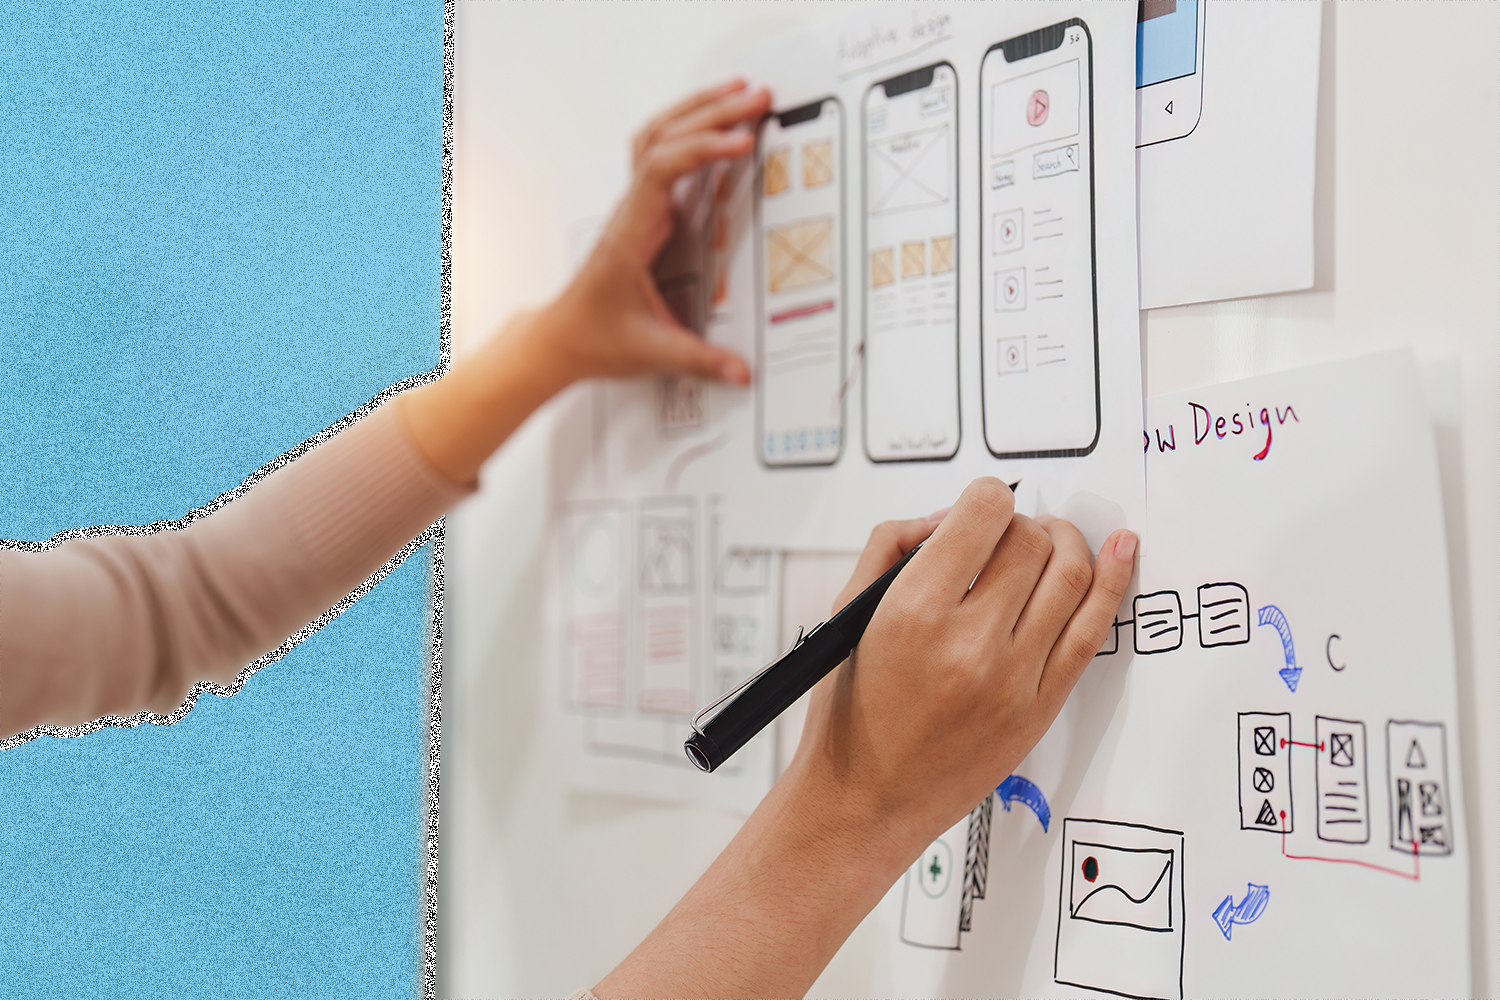 A whiteboard with mobile app designs and a person holding a pen